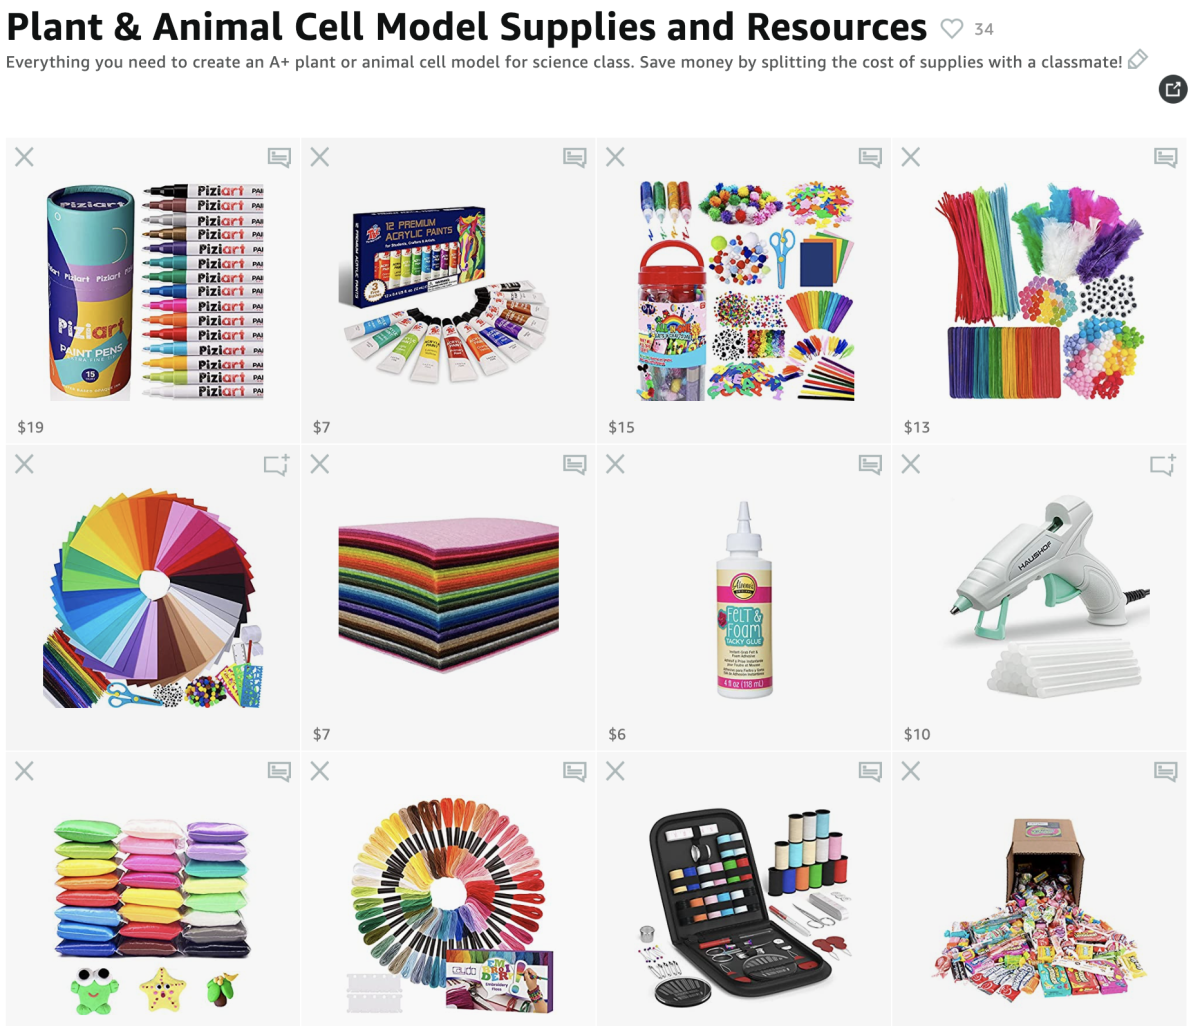 Short on time? My Amazon Idea List has everything you need to create a cell model for science class. Click the link above to view my list!